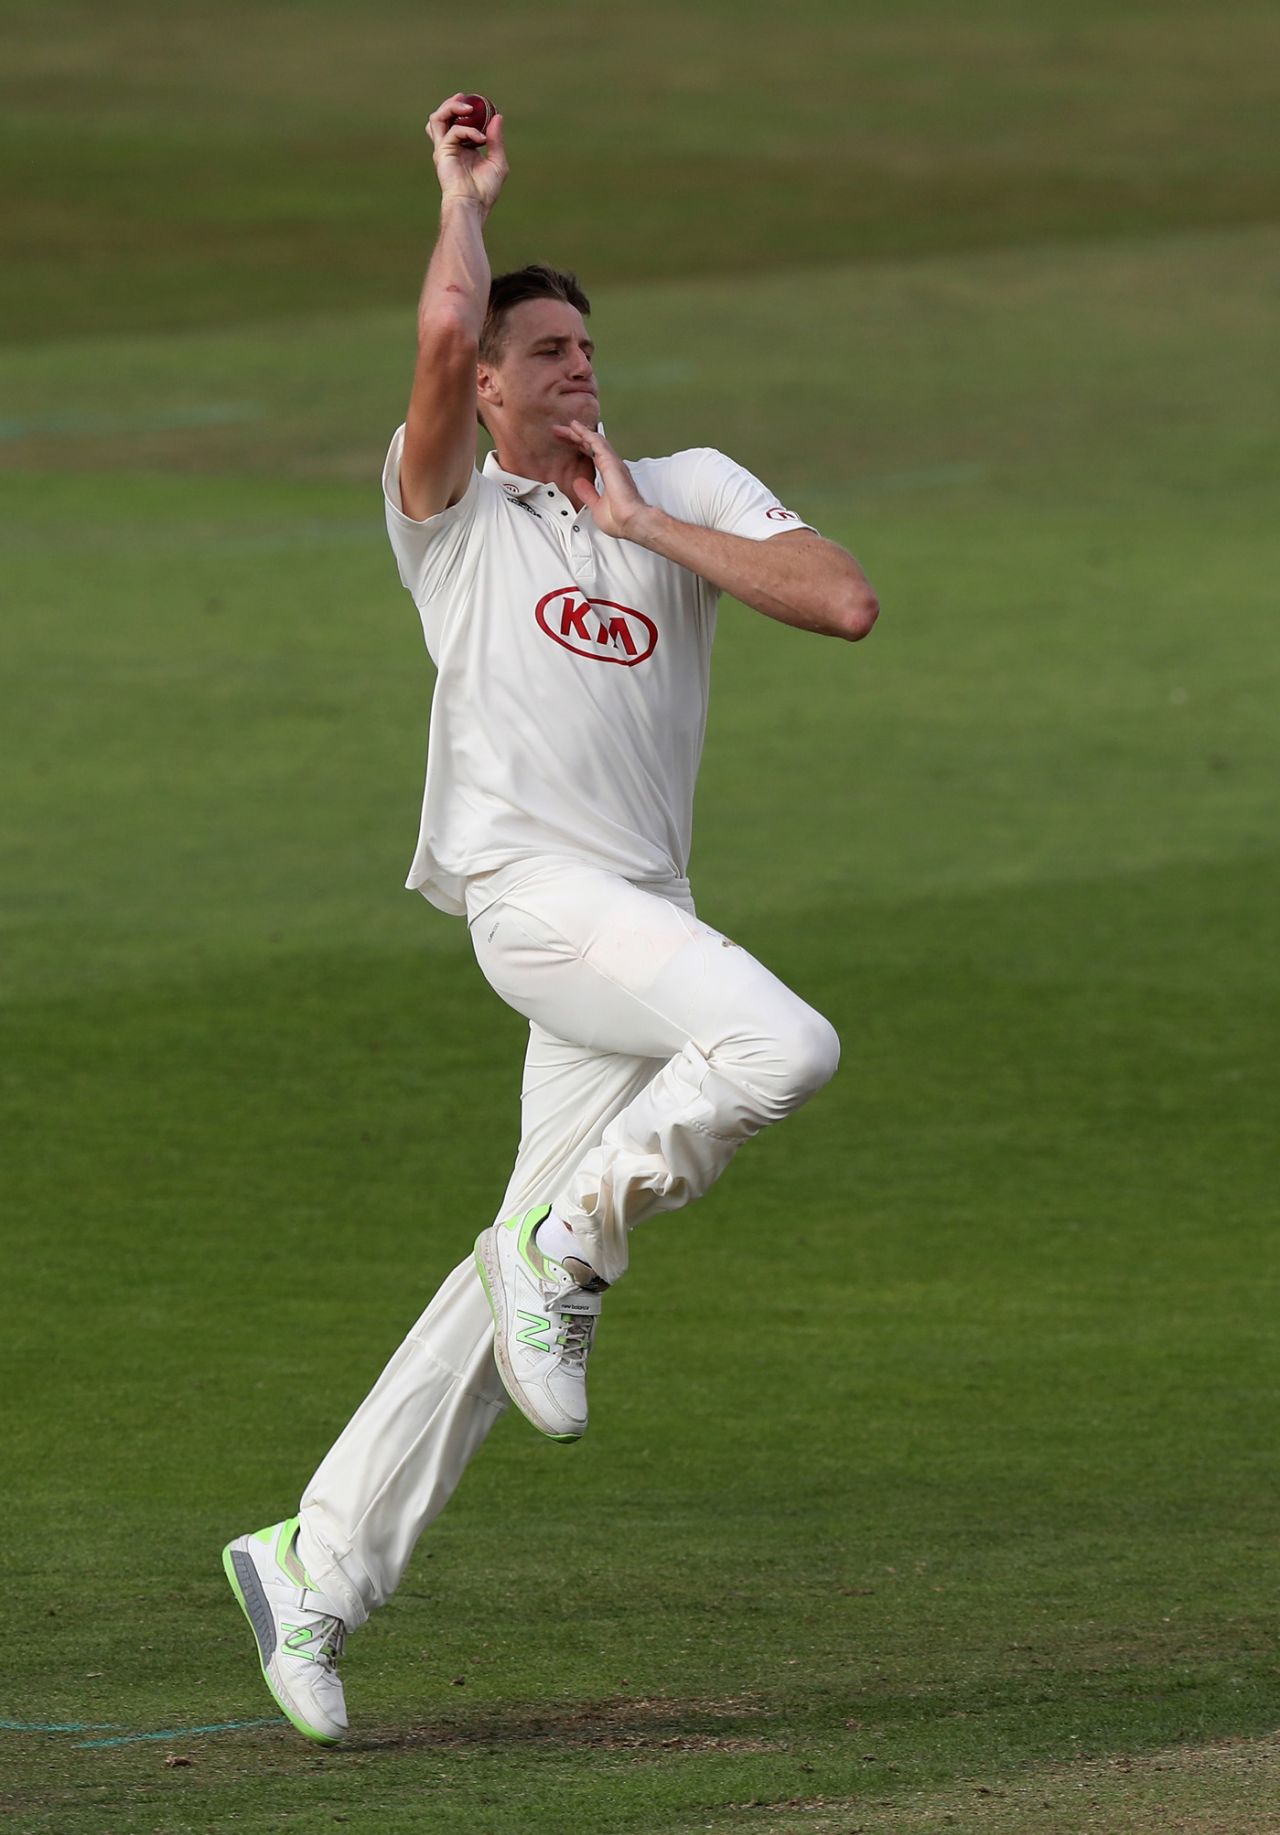 Morne Morkel has been an influential Surrey signing, Notts v Surrey, Specsavers Championship Division One, Trent Bridge, July 24, 2018.